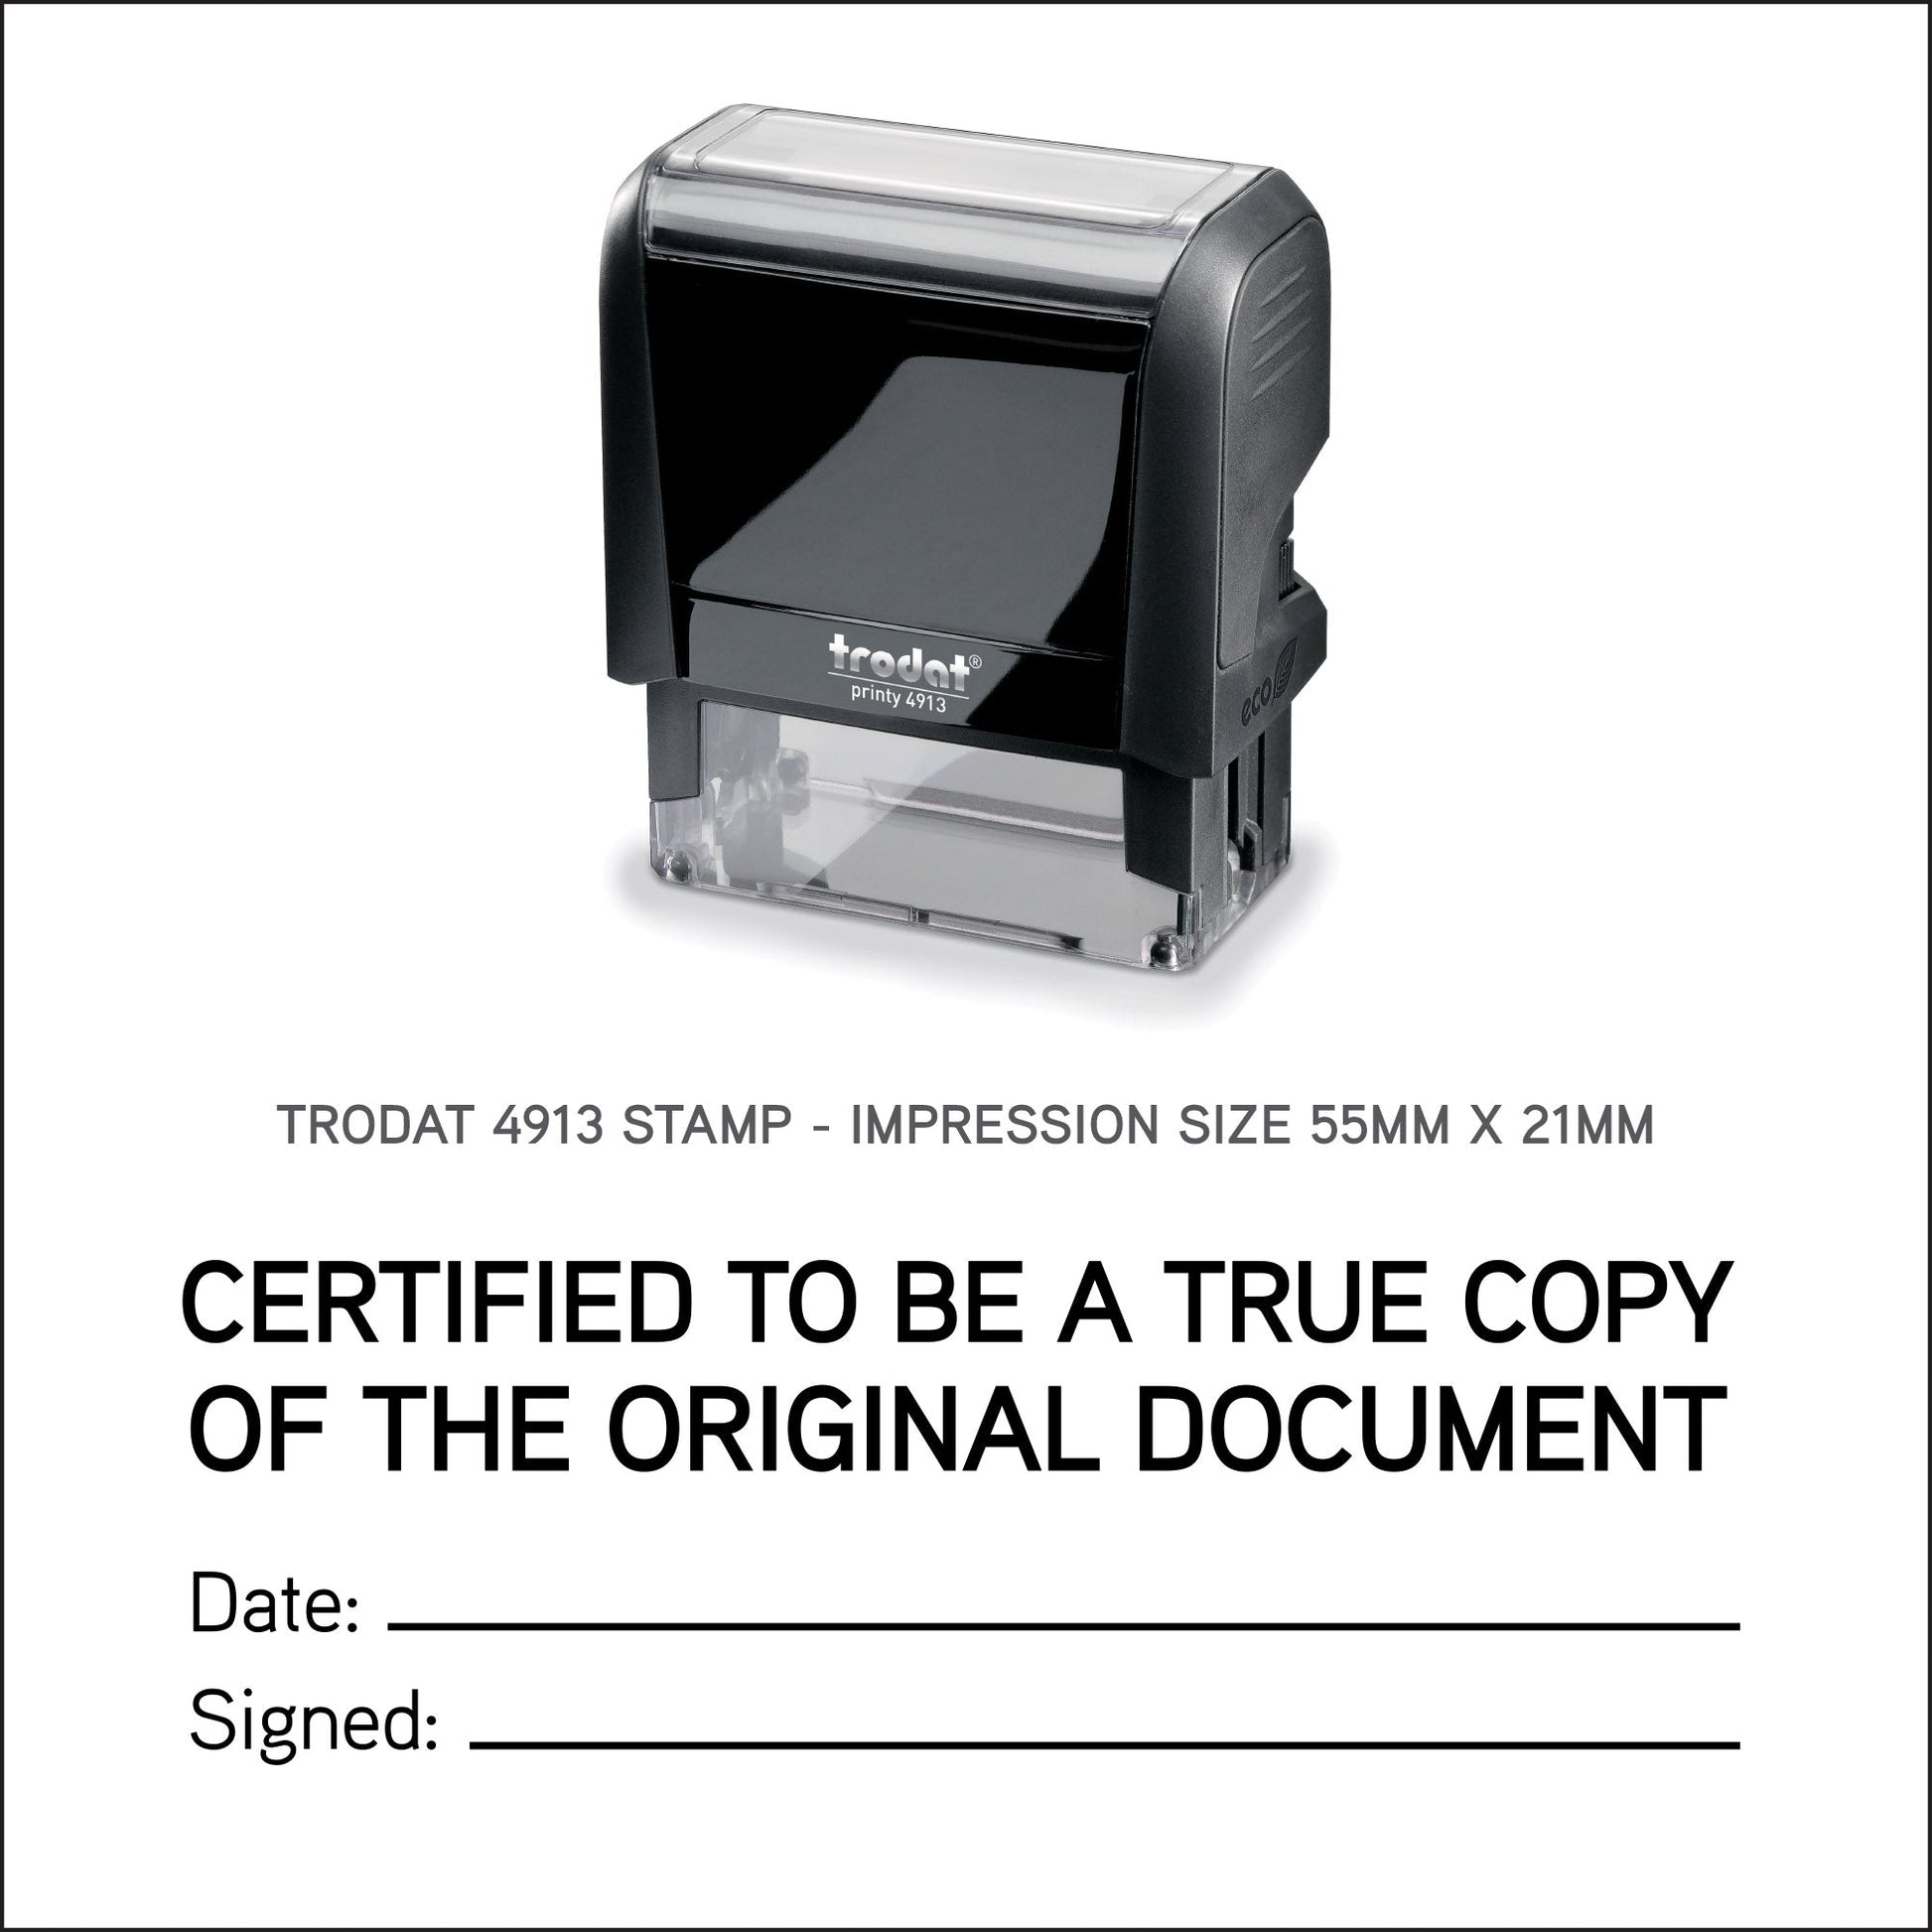 Certified To Be A True Copy - Rubber Stamp - Trodat 4913 - 55mm x 21mm Impression